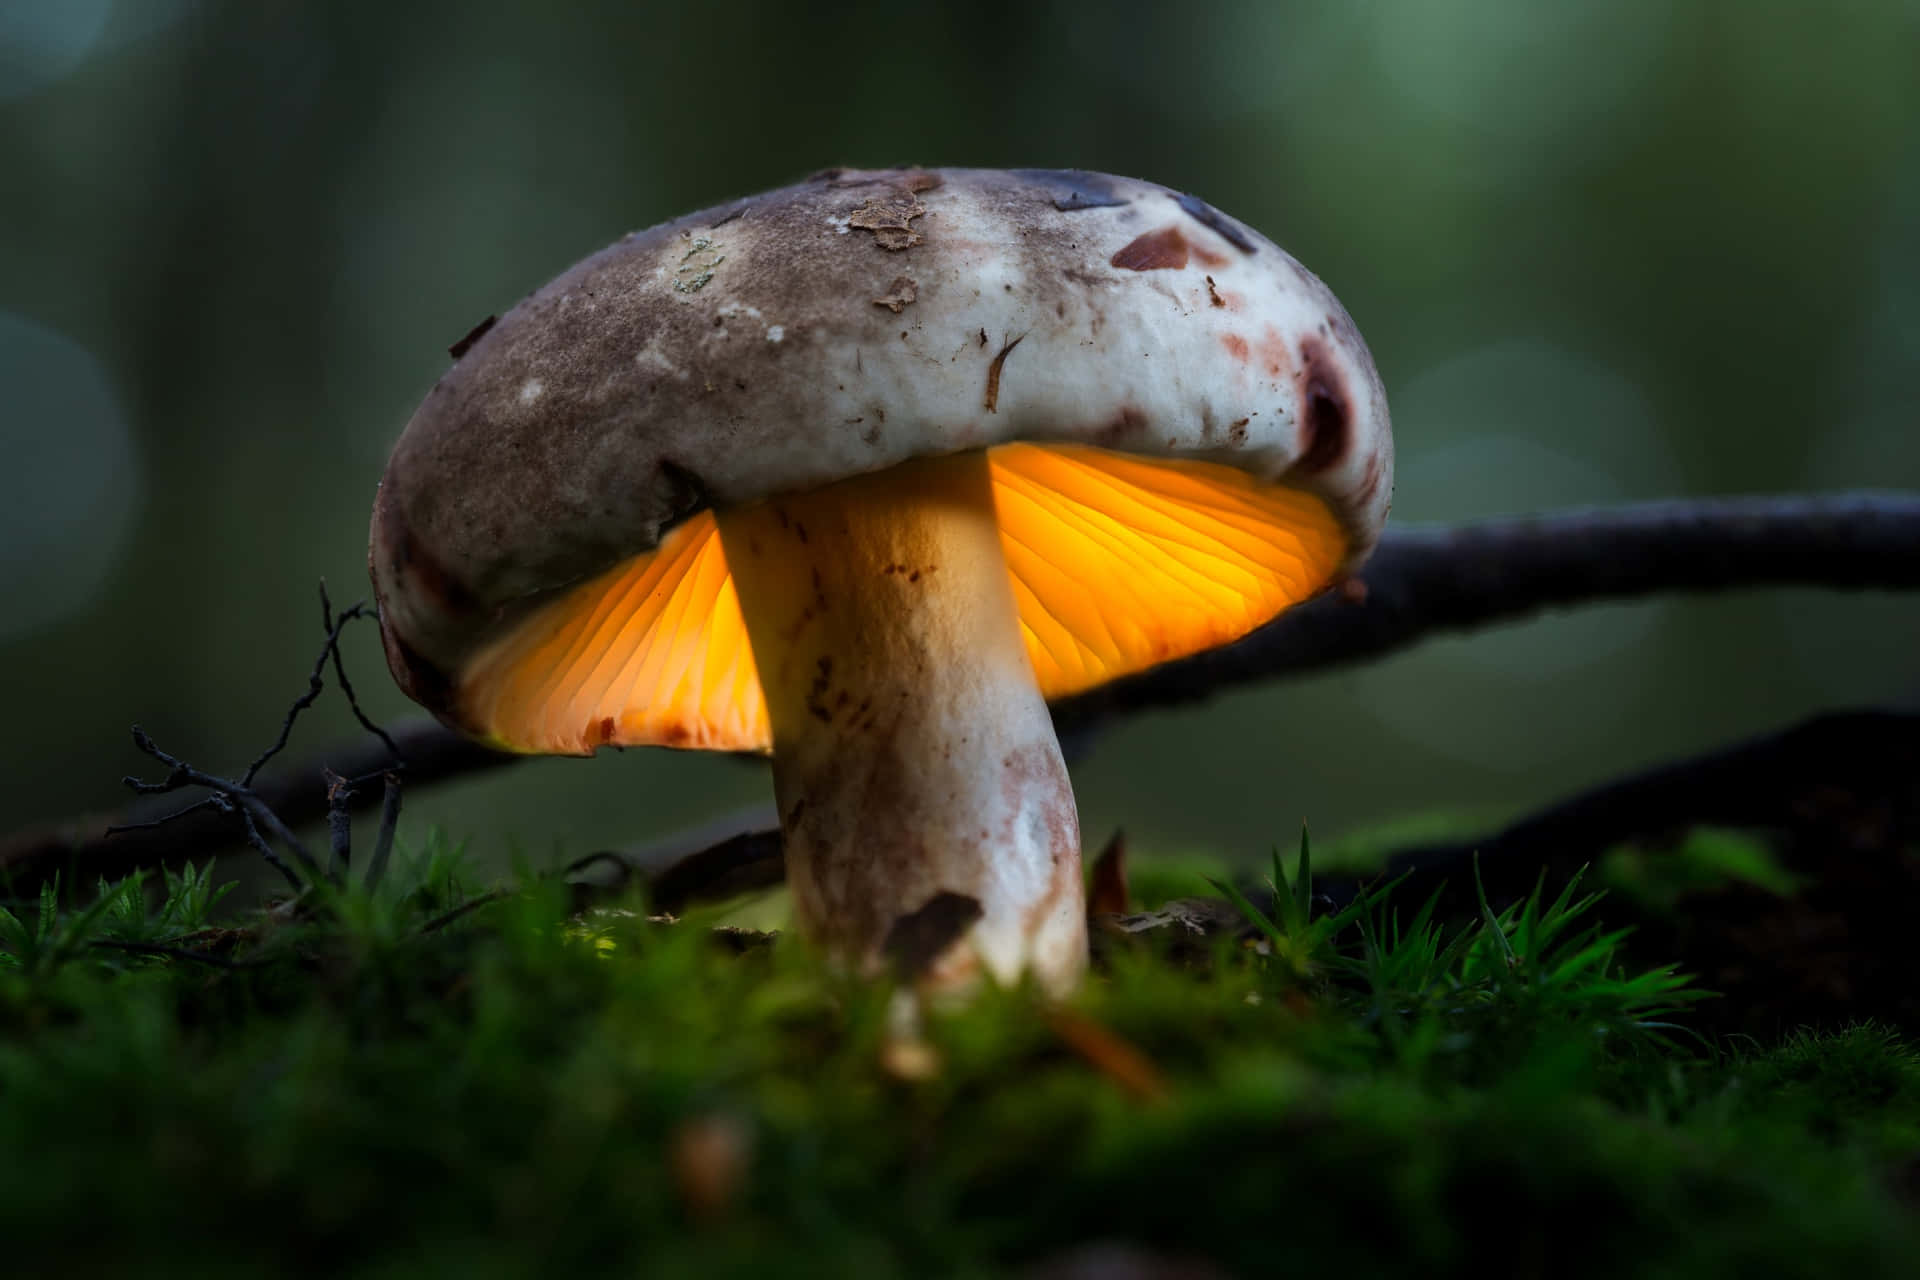 A Mushroom Is Lit Up In The Forest